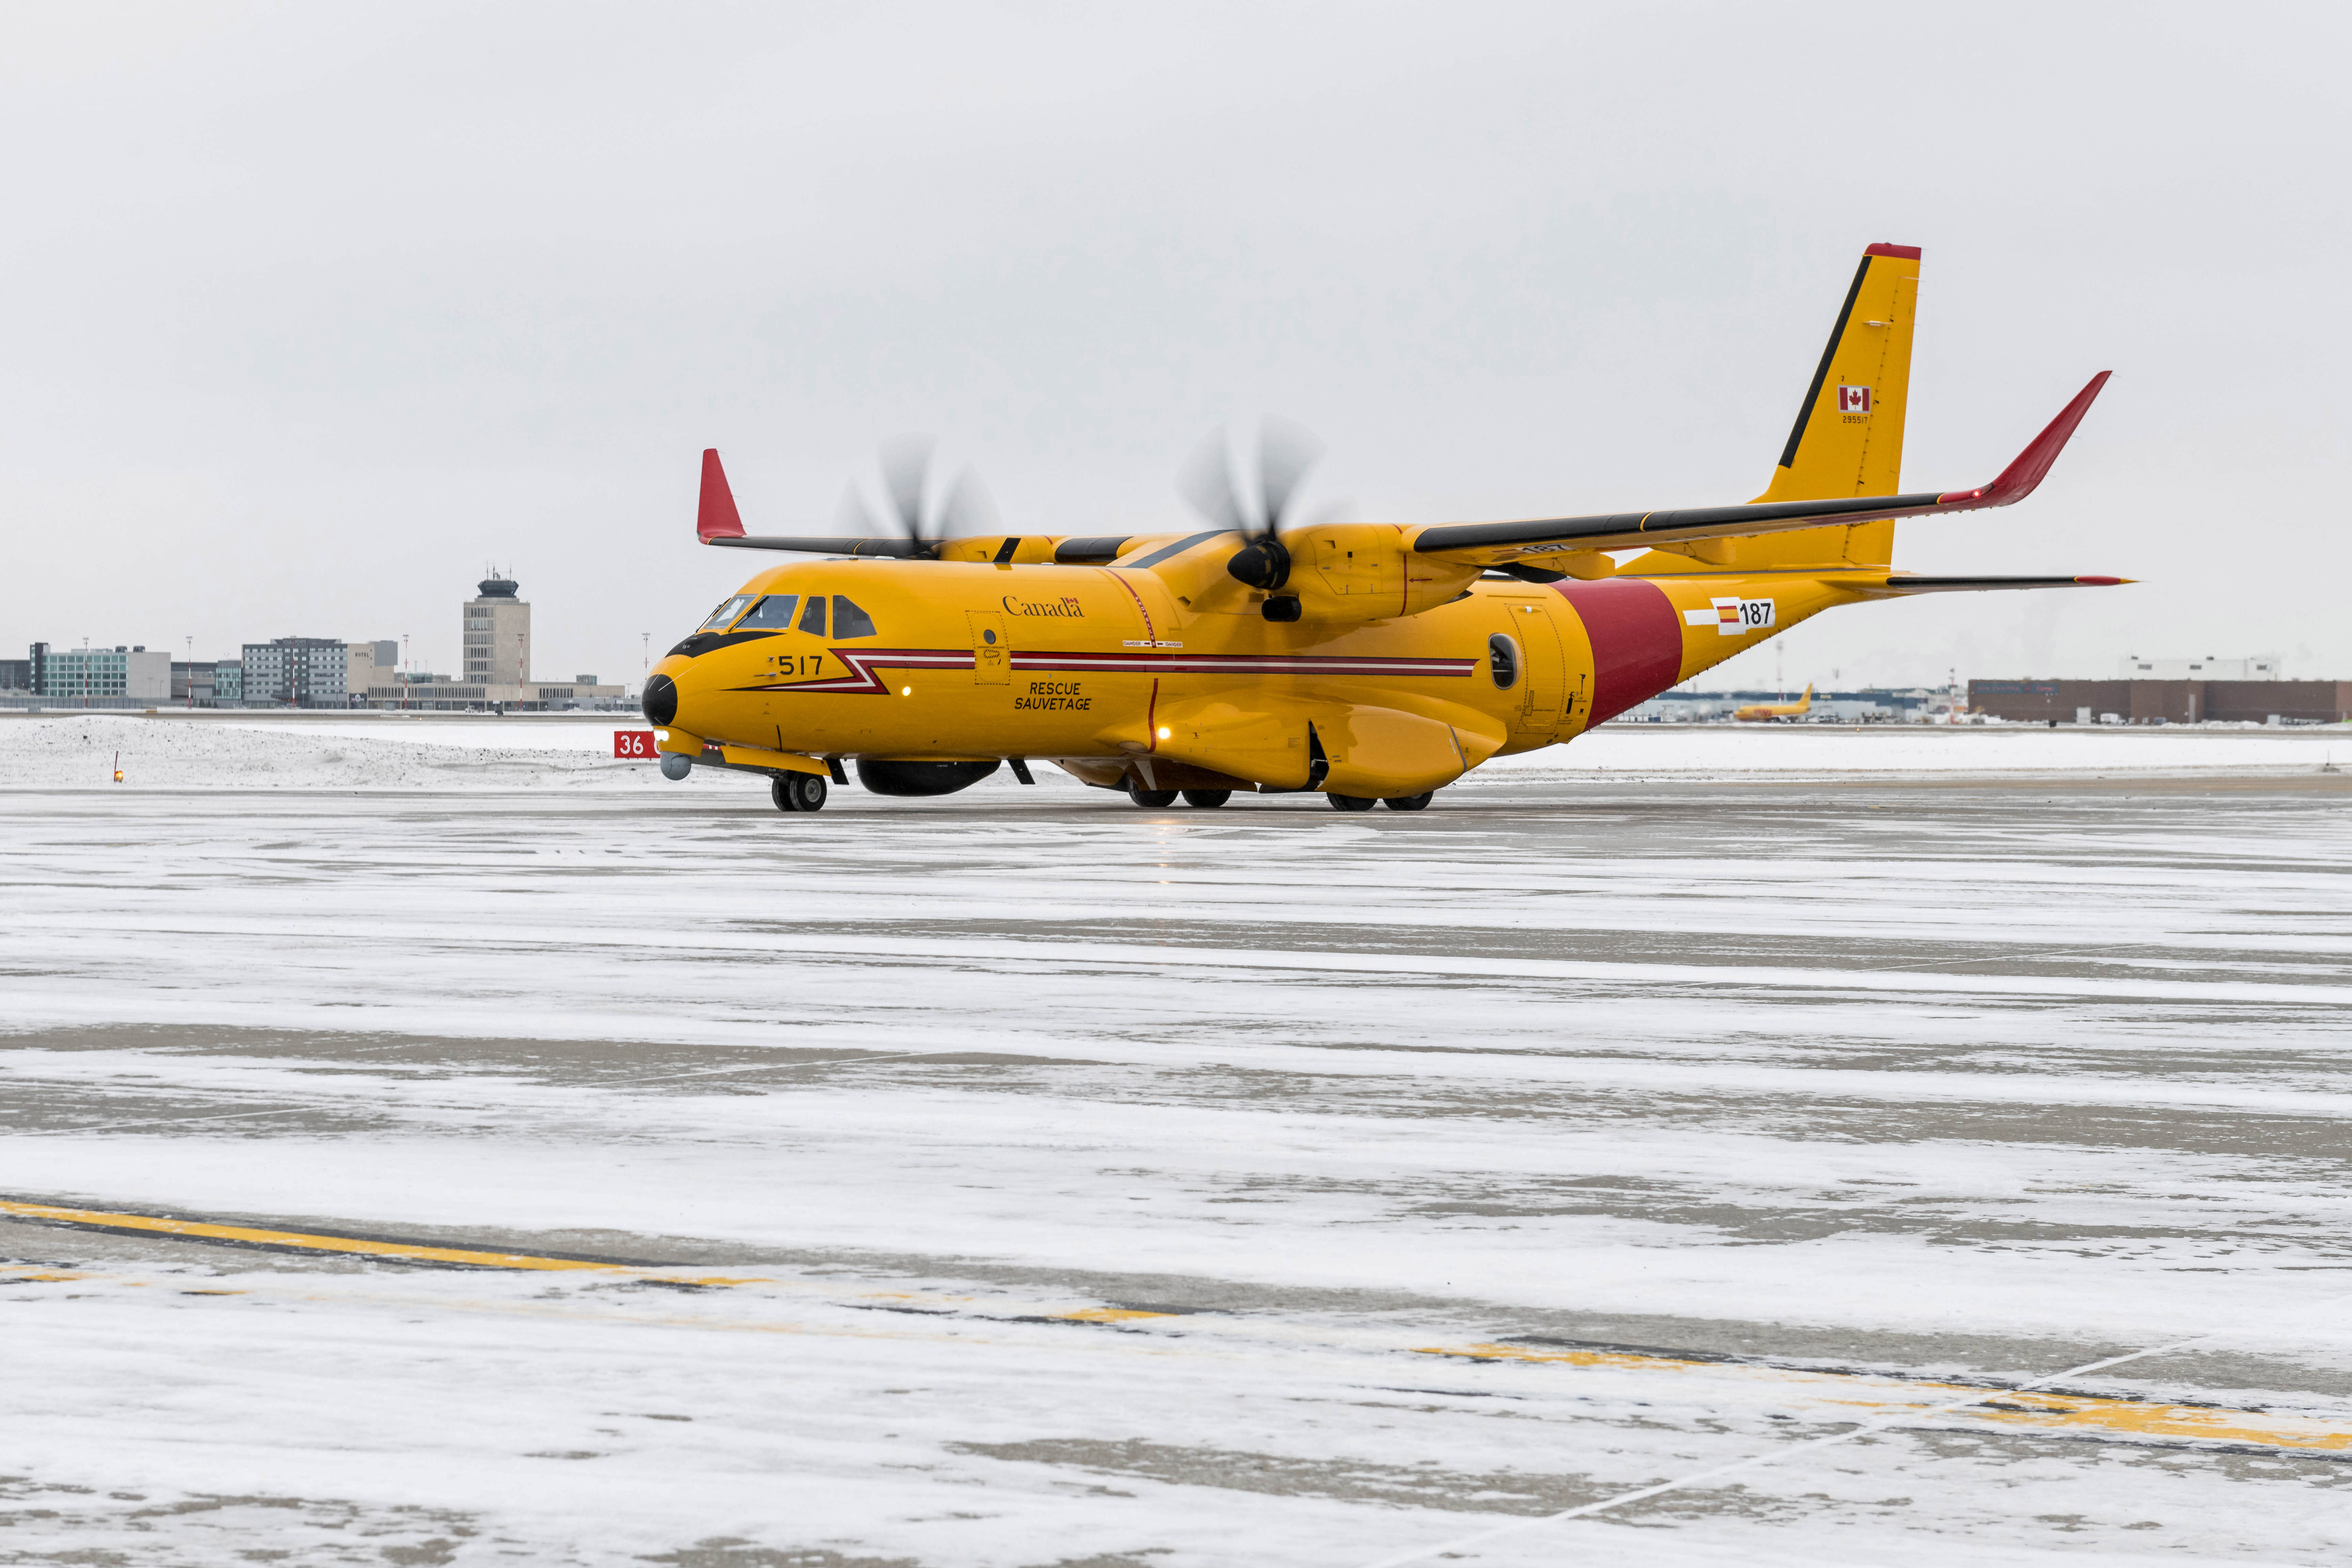 A training variant of the CC-295 Fixed Wing Search and Rescue aircraft arrives at 17 Wing Winnipeg, Manitoba during its cross-Canada itinerary on February 3, 2020. PHOTO: Sergeant Daren Kraus